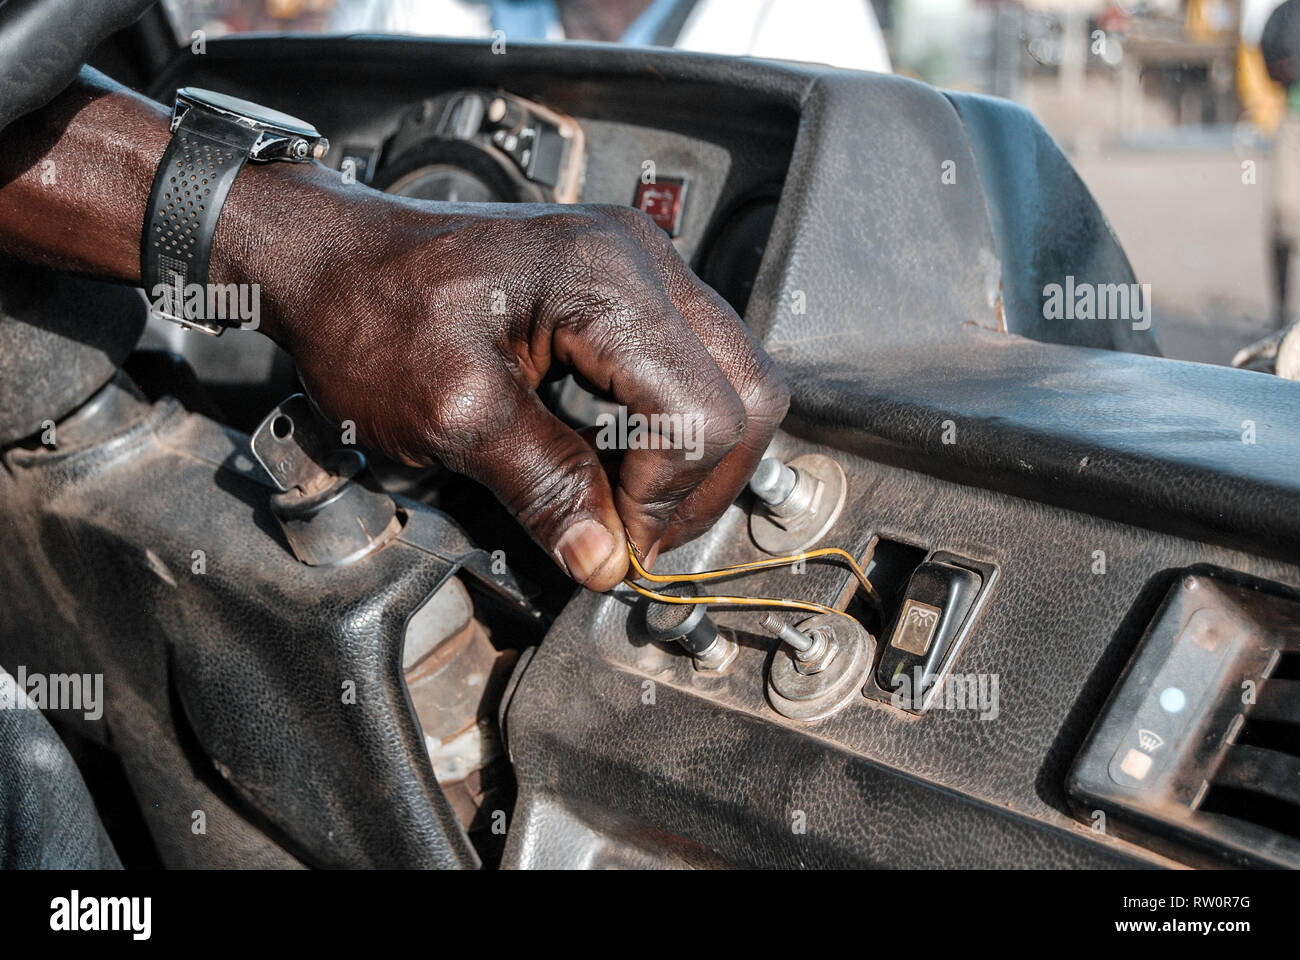 Broken starter. A closeup of a hand of a Ghanaian bus driver who is starting the bus engine by short circuiting two wires. Stock Photo